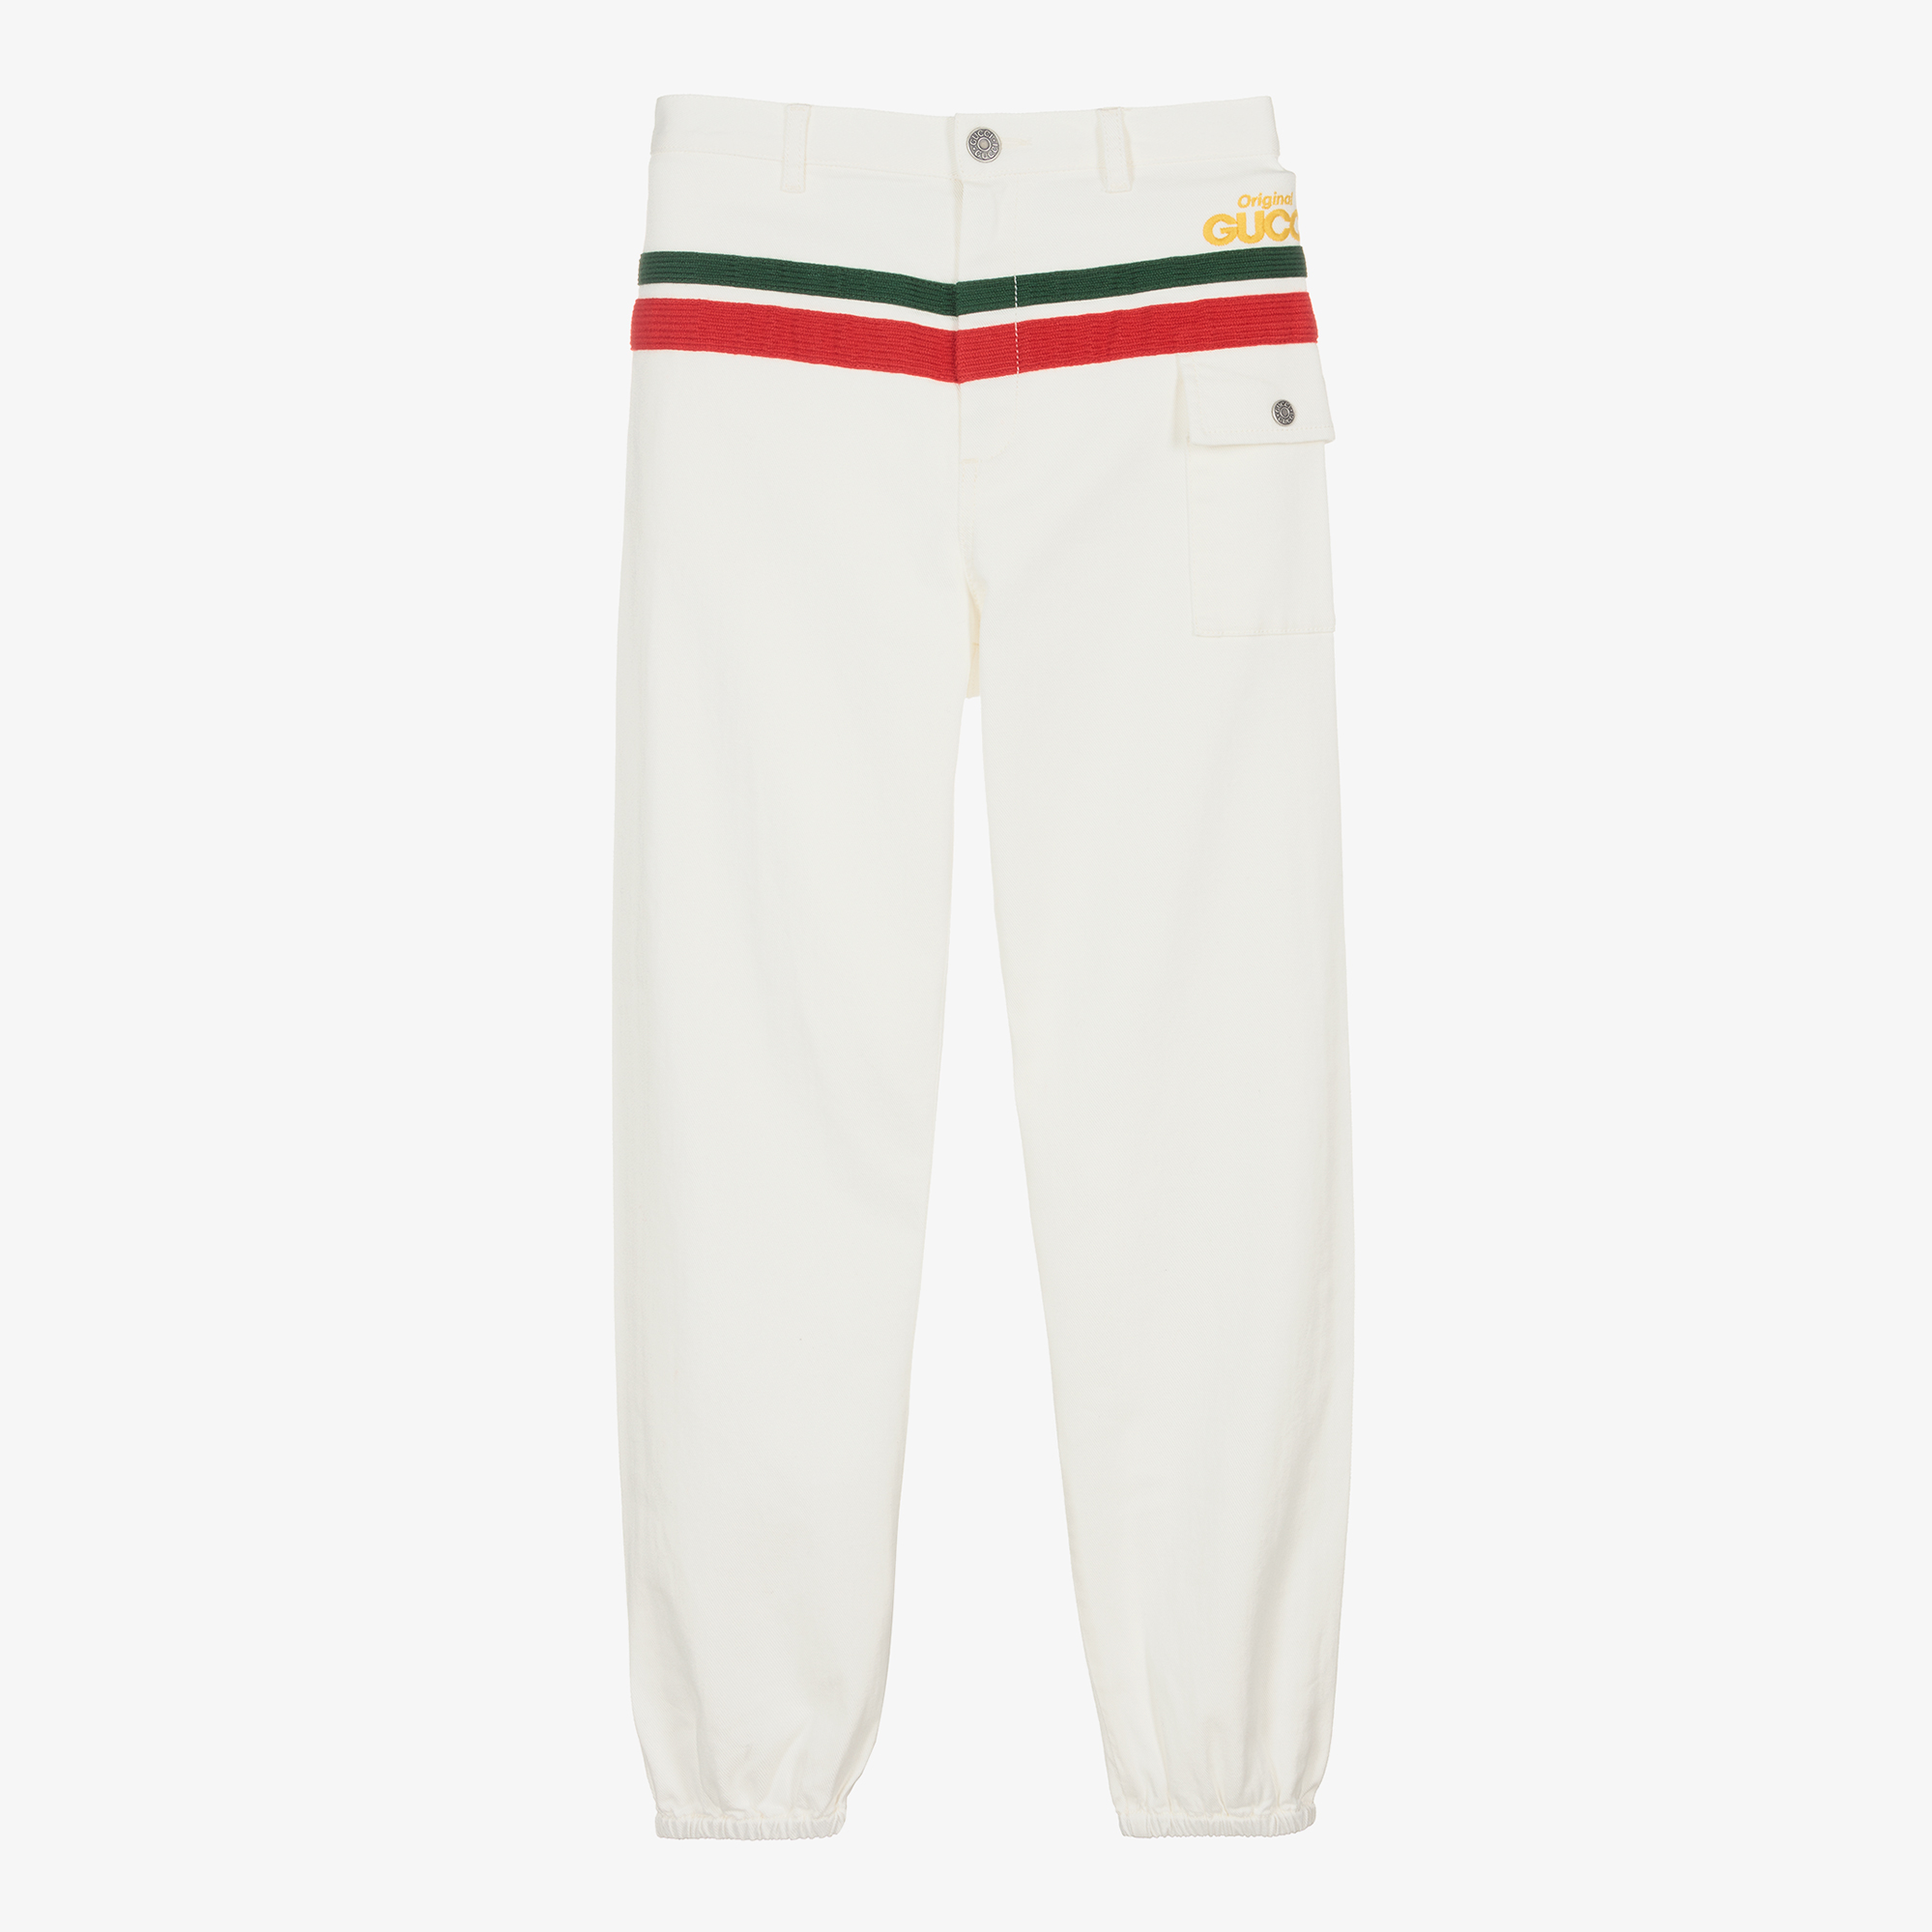 Latest Gucci Trousers arrivals  8 products  FASHIOLAin